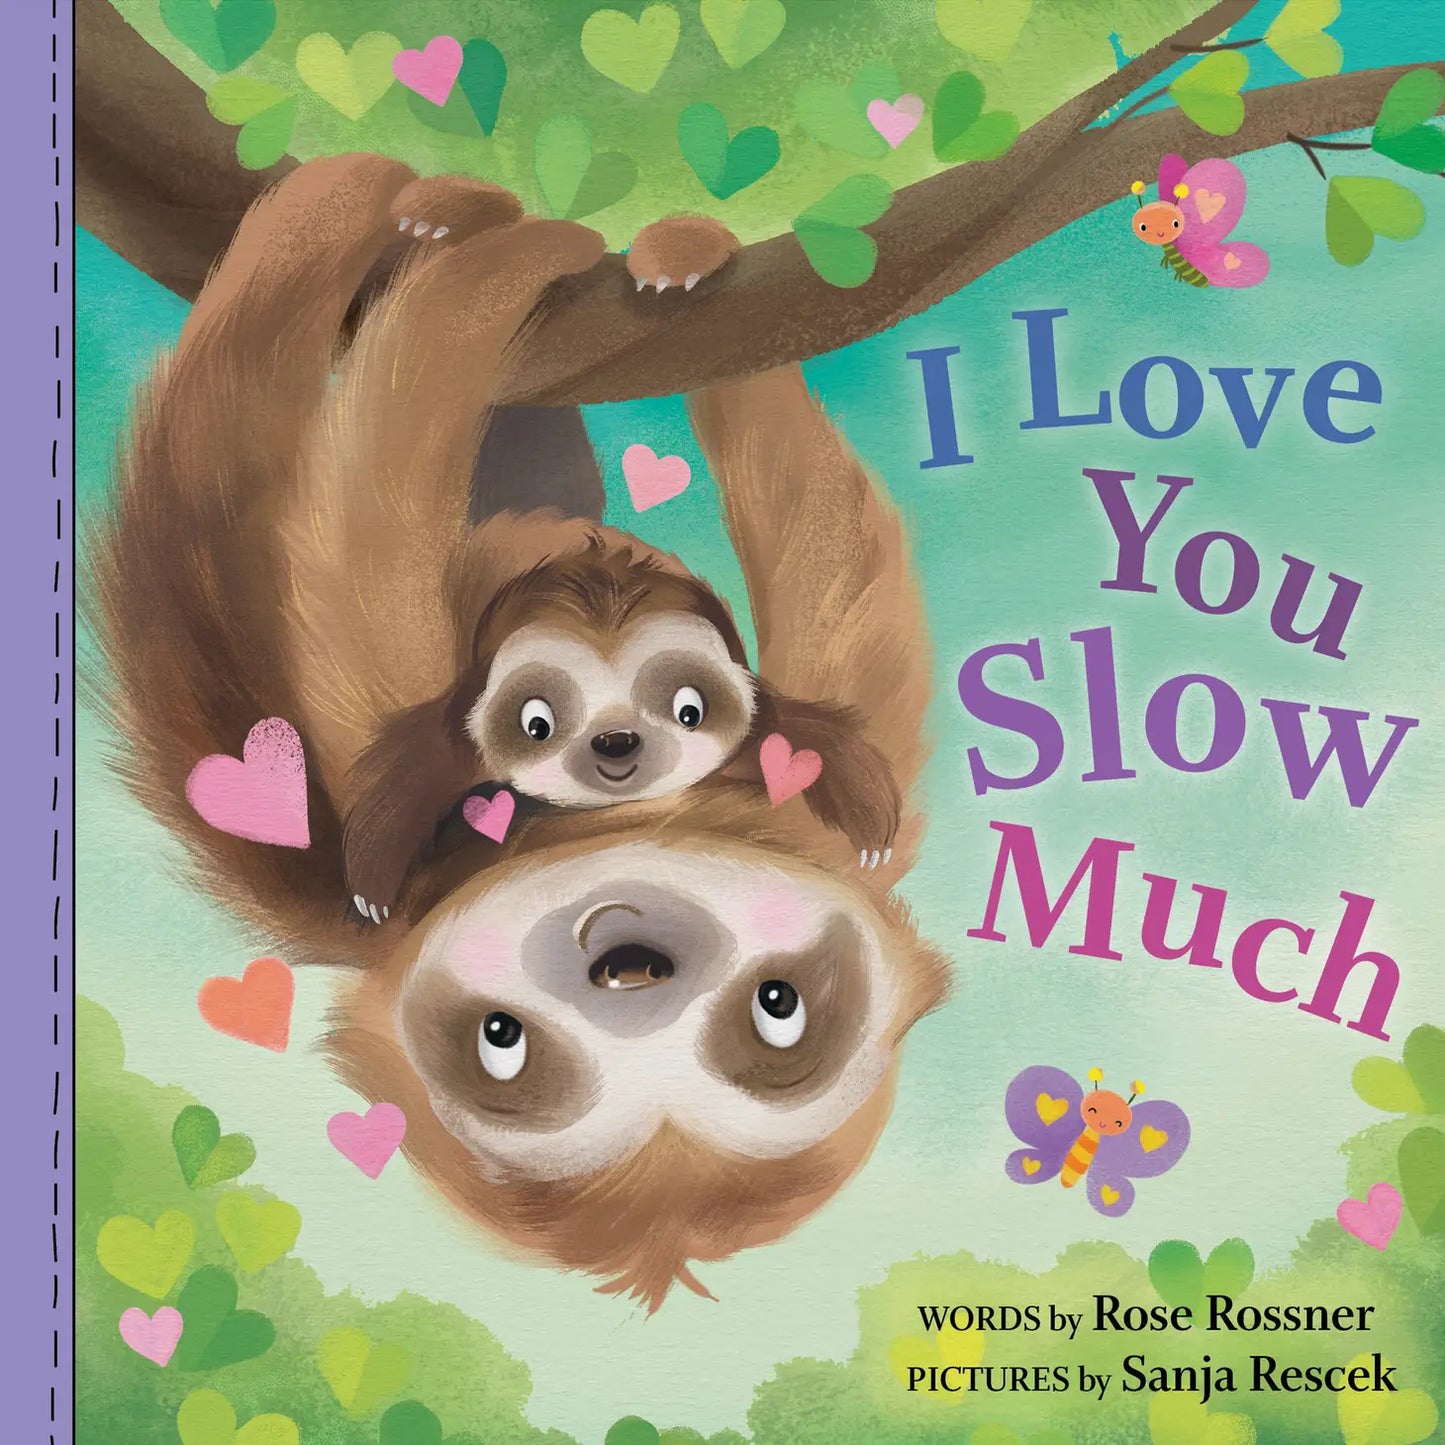 I Love You Slow Much-Book